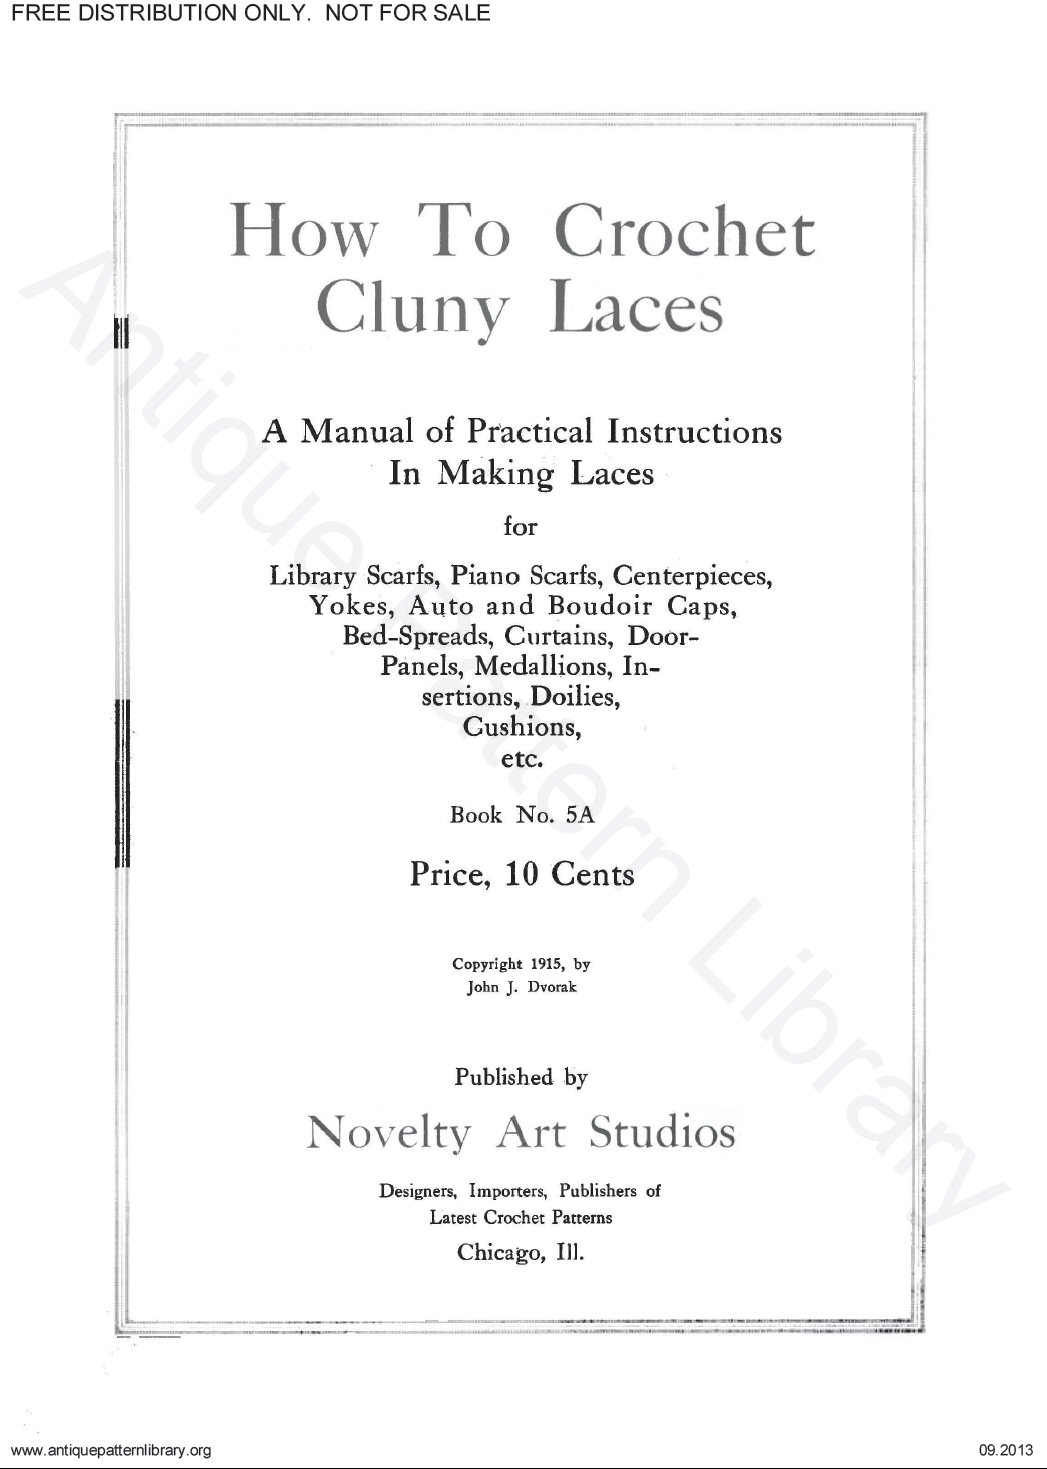 6-JA001 How to Crochet Cluny Laces, Book No. 5A